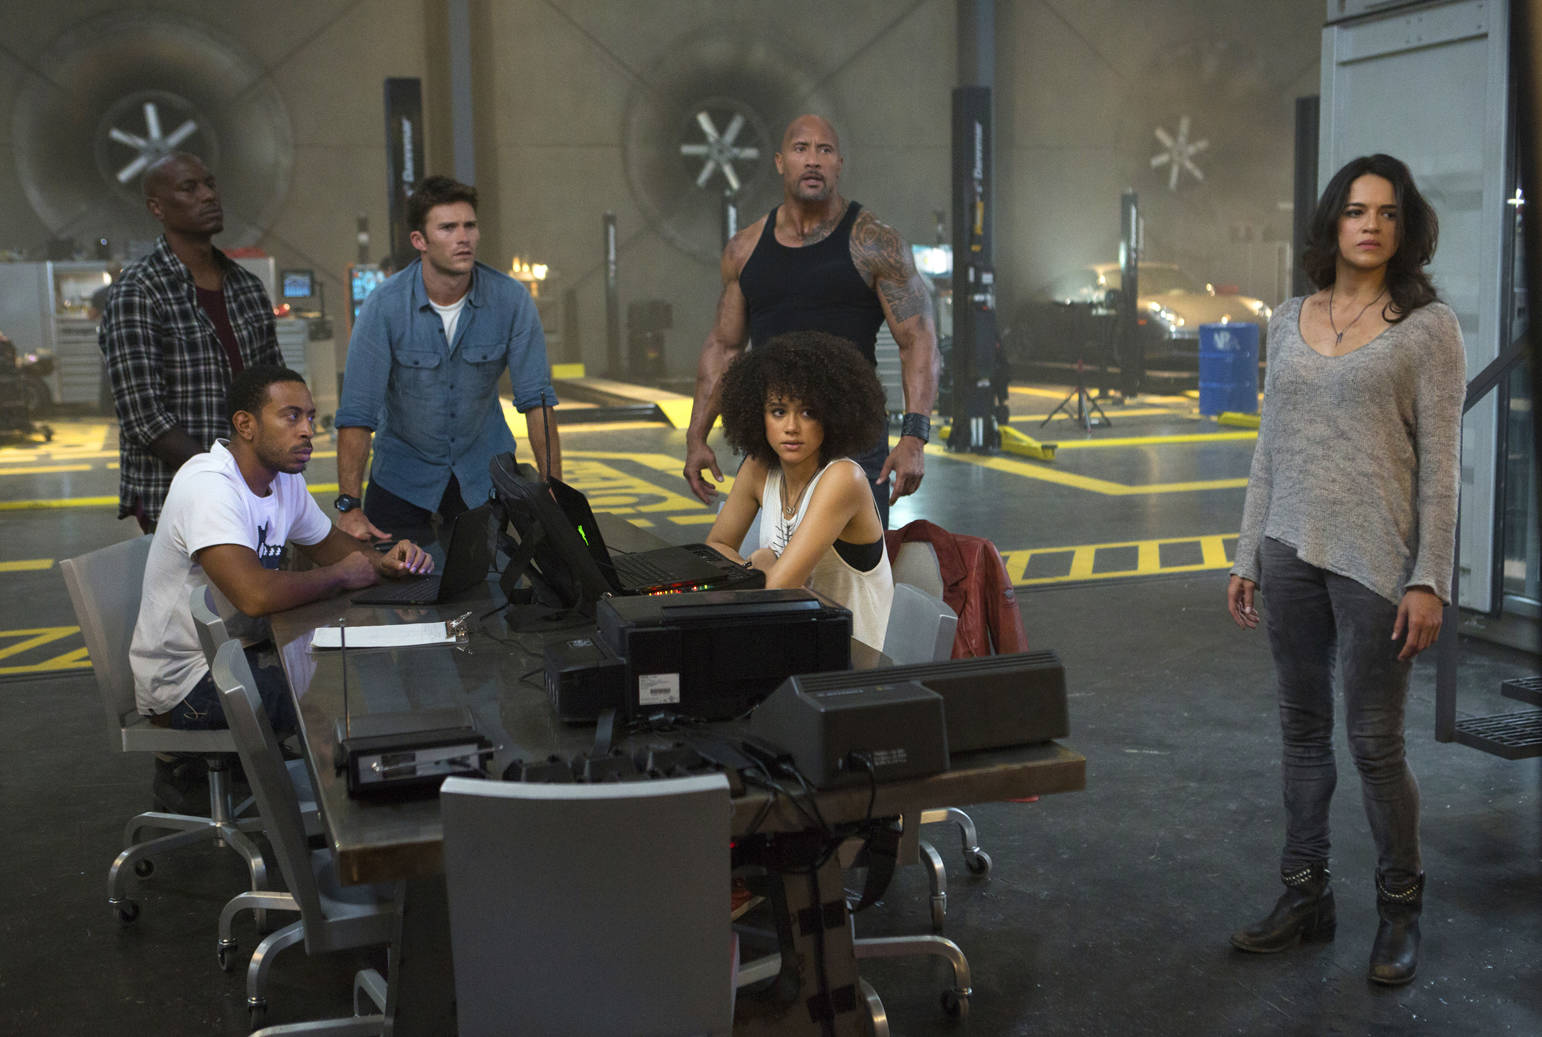 This image released by Universal Pictures shows, Chris “Ludacris” Bridges, seated left, and Nathalie Emmanuel, seated right, and Tyrese Gibson, standing from left, Scott Eastwood, Dwayne Johnson and Michelle Rodriguez in “The Fate of the Furious.” (Matt Kennedy/Universal Pictures via AP)